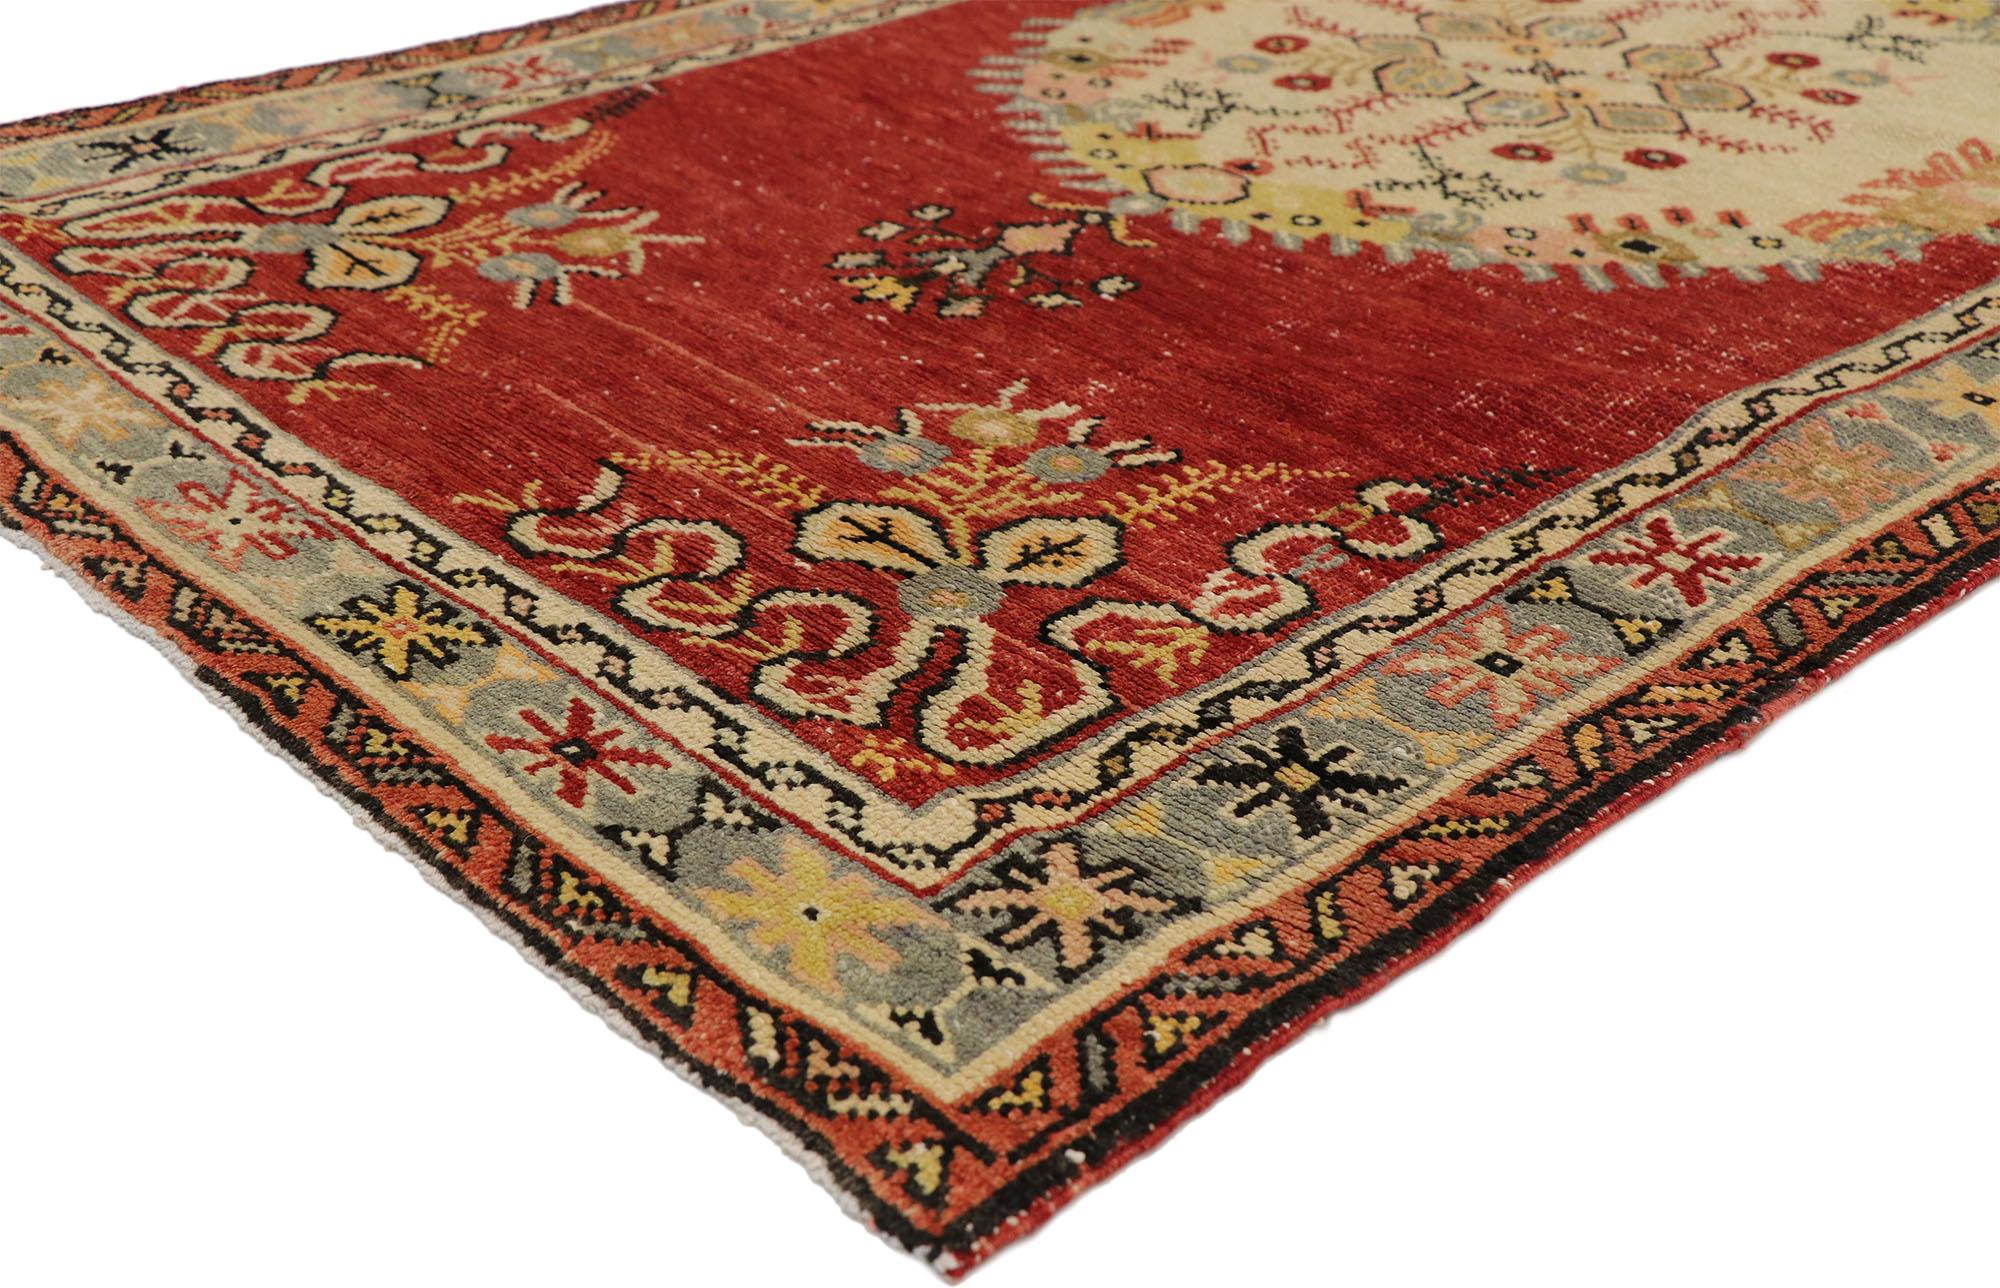 51175, distressed vintage Turkish Oushak Hallway runner with rustic French Rococo style. This hand knotted wool distressed vintage Turkish Oushak runner features three round central medallions filled with stylized geometric flowers to the centre.